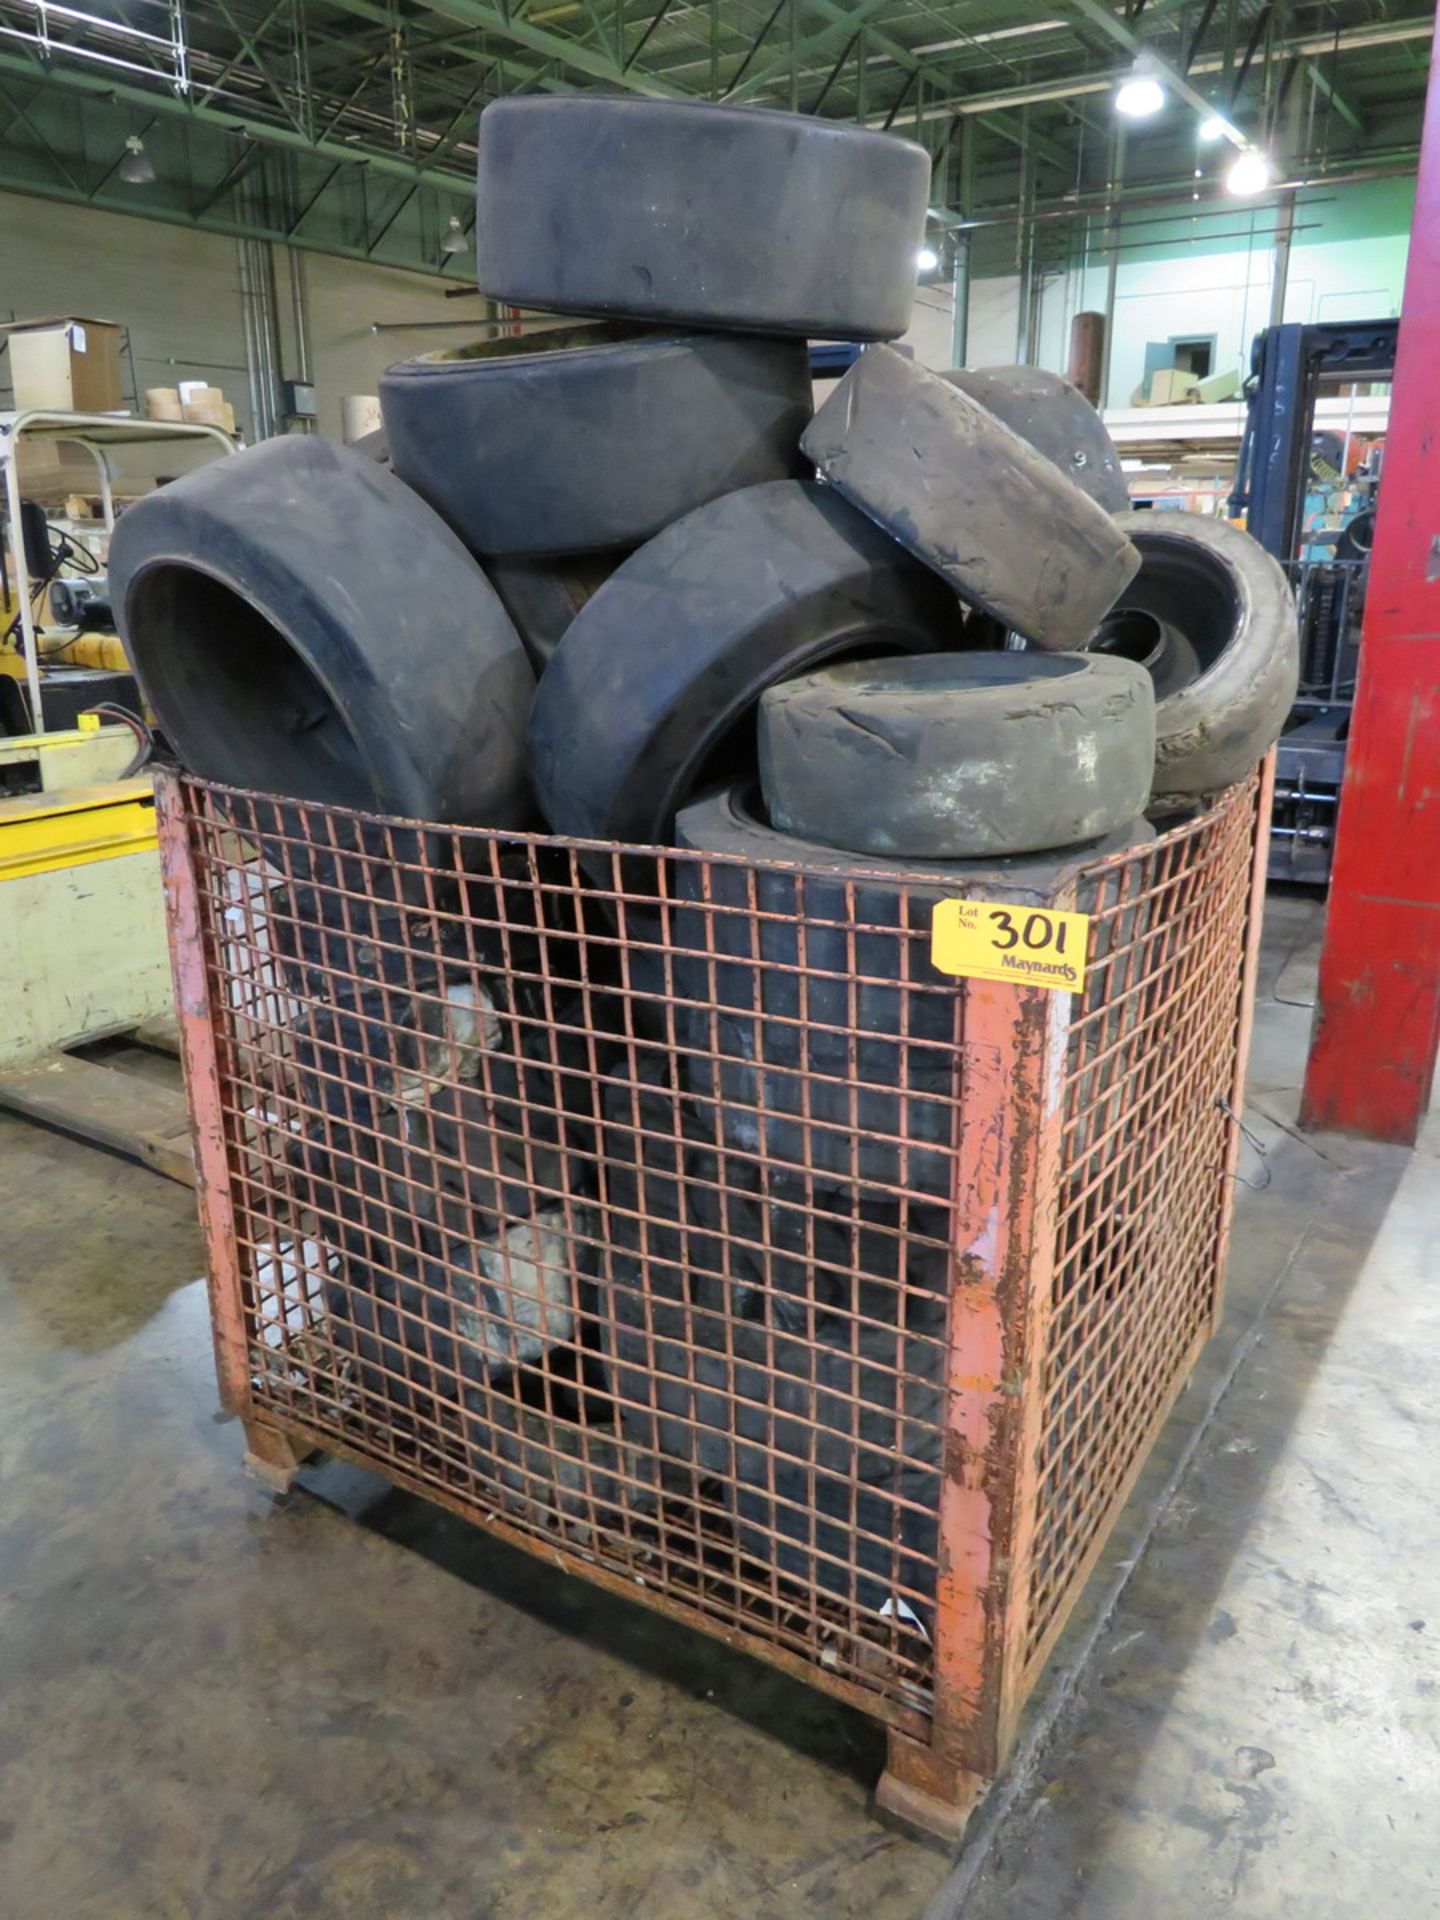 Assorted Used Forklift Tires and Rims Approximately 5' X 5' [Loc: Church Hill]